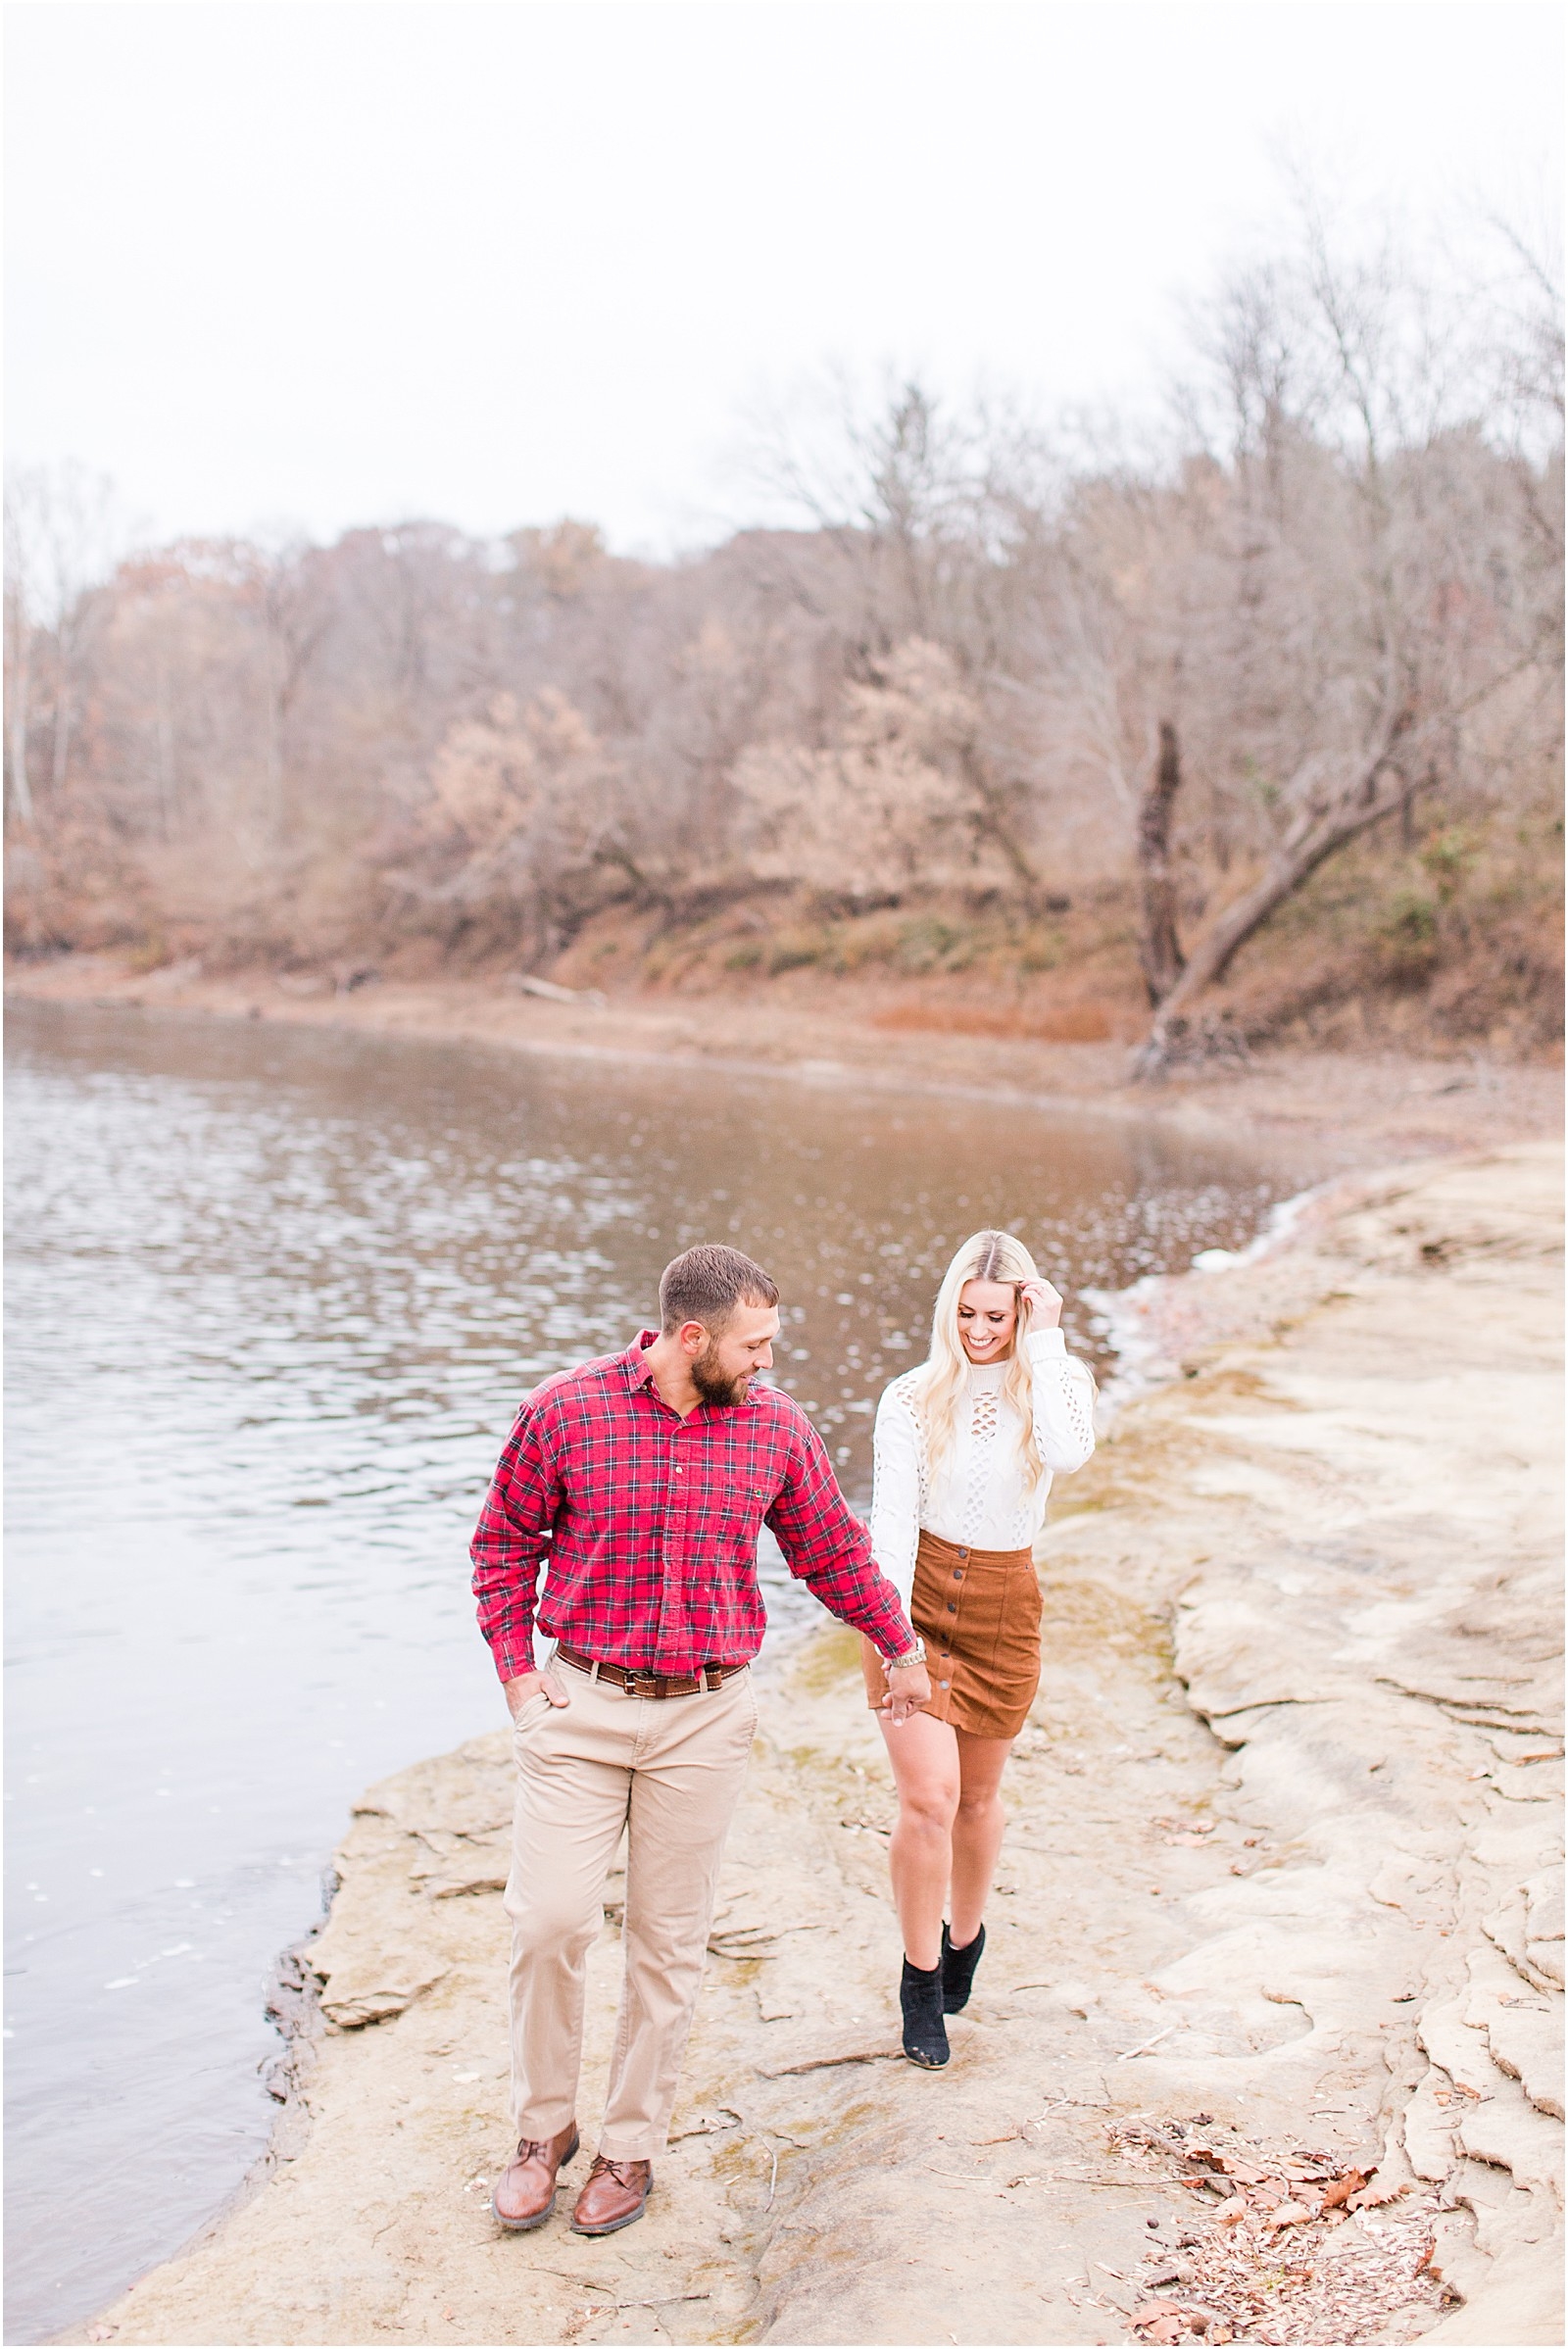 An sweet and snuggly fall anniversary session in Loogootee, Indiana. | #anniversarysession #fallsession #southernindianawedding | 009.jpg